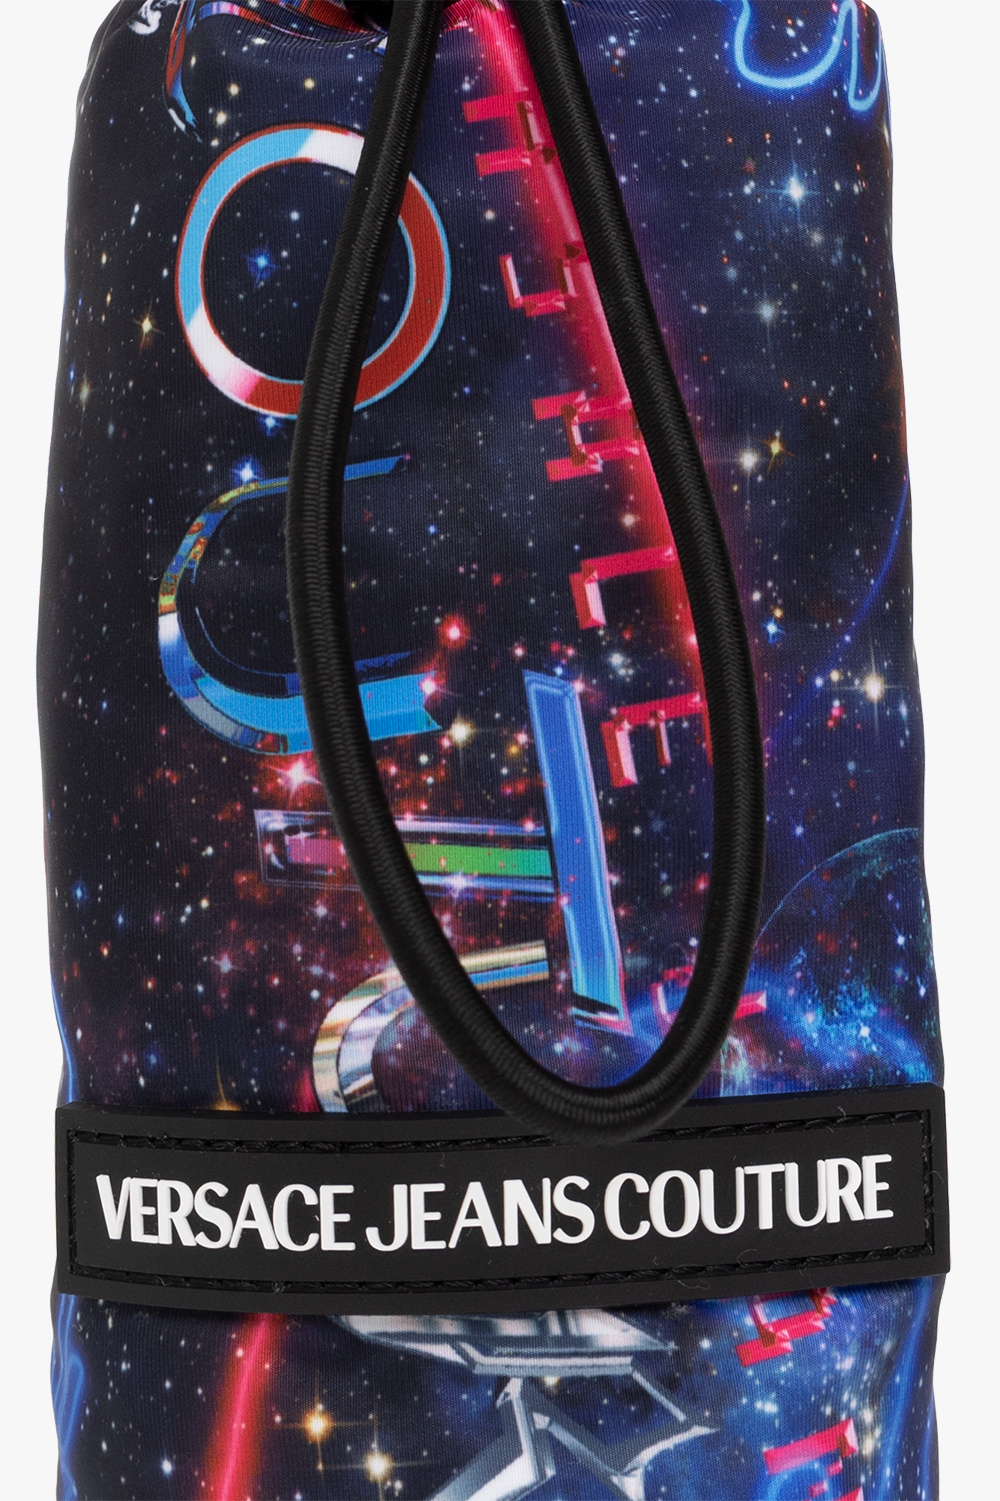 Versace Jeans Couture Bottle holder